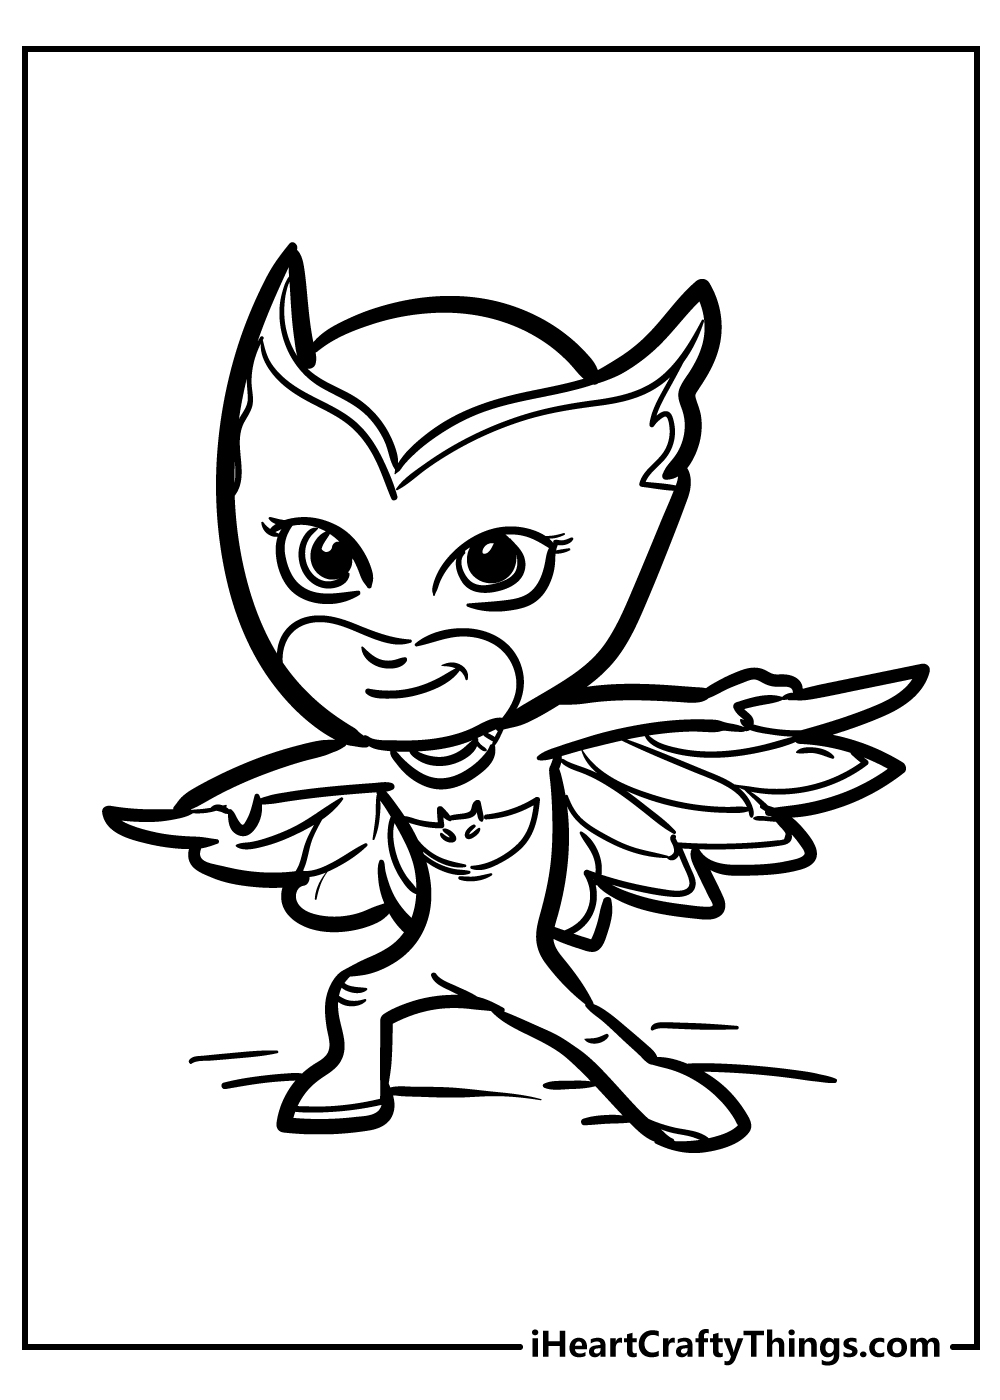 PJ Masks Coloring Pages (Updated 2021)